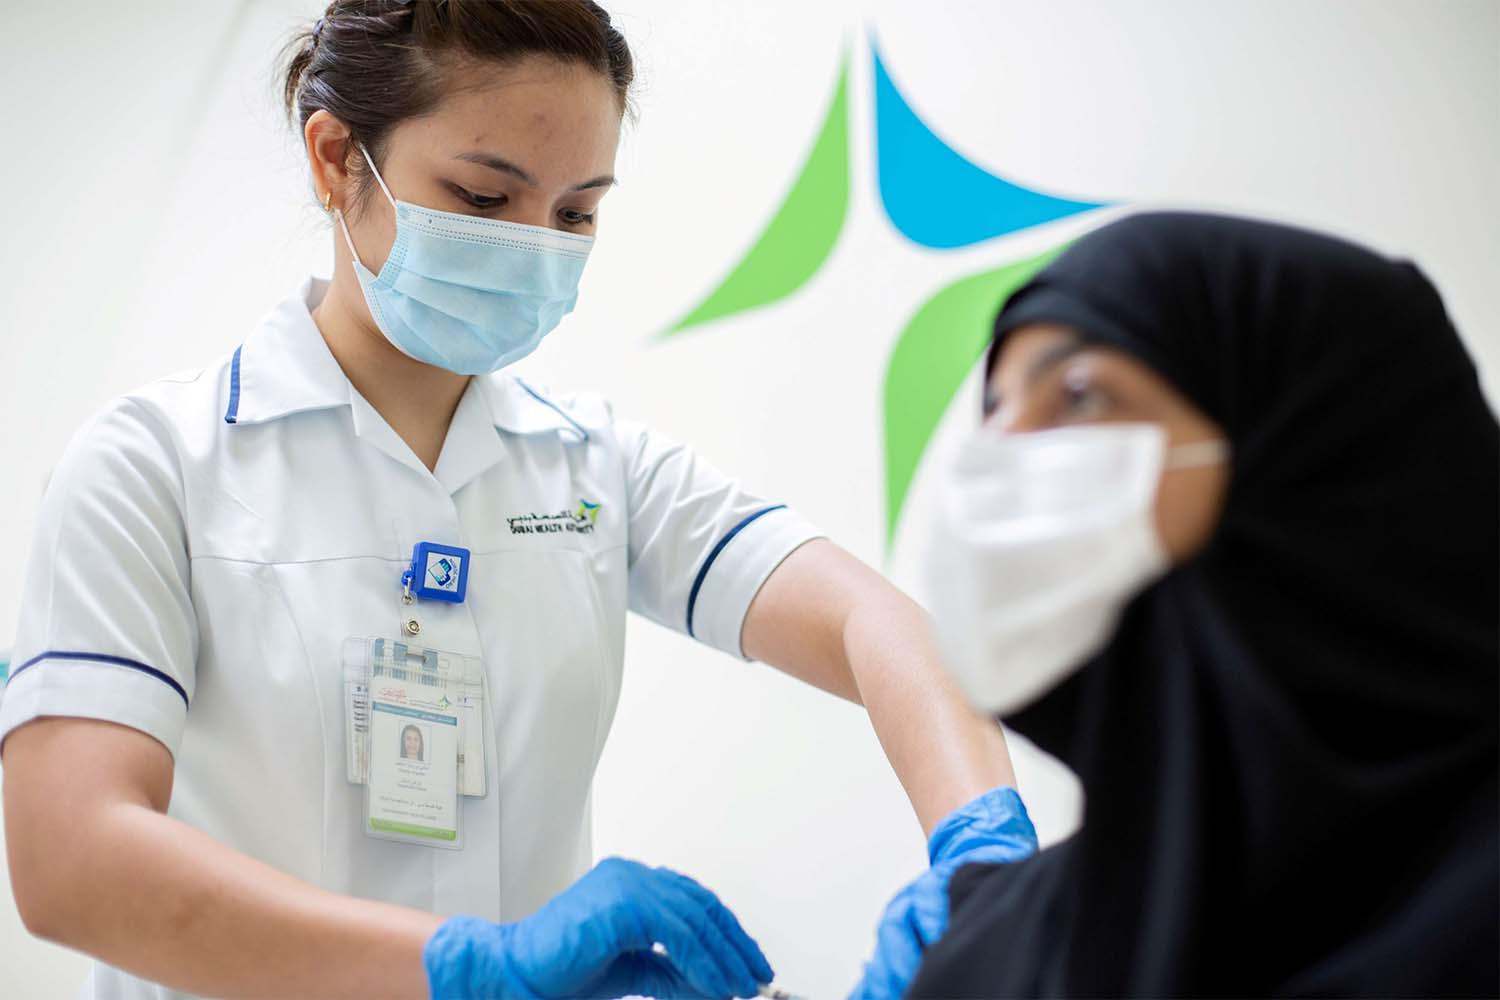 Dubai is already inoculating residents, free of charge, with the Pfizer-BioNTech and Sinopharm vaccines